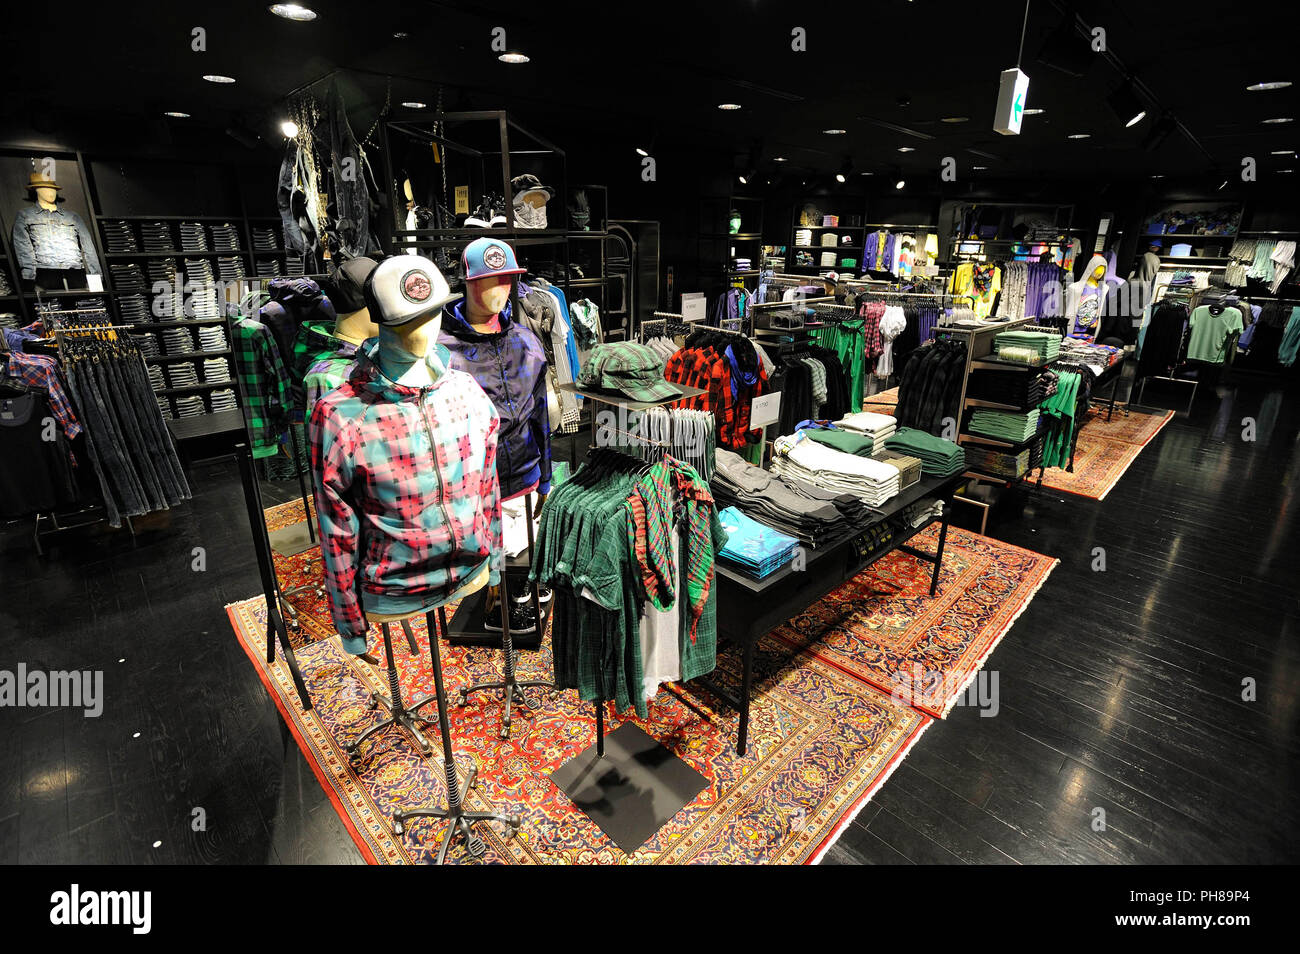 Men's clothing is displayed H&M Hennes & Mauritz Japan KK's soon-to-open  flagship store in the Shibuya district of Tokyo, Japan on Wednesday 16 Sept  Stock Photo - Alamy